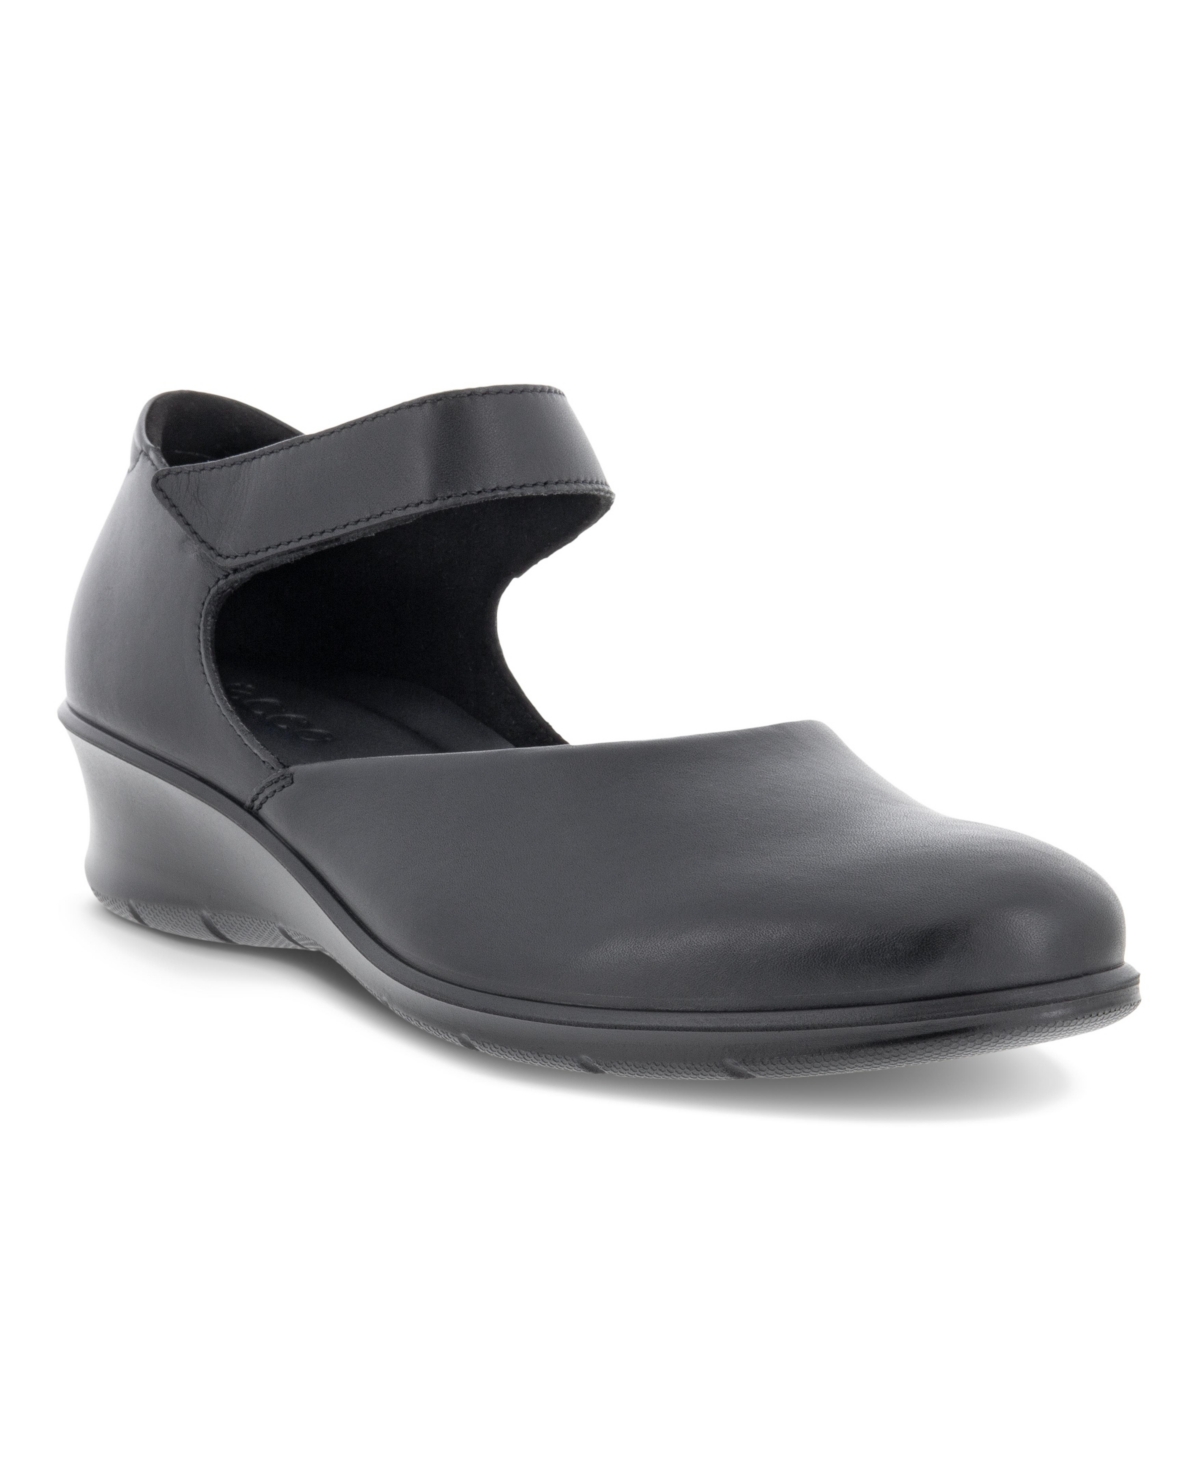 UPC 194891095723 product image for Ecco Women's Felicia Mary Jane Flats Women's Shoes | upcitemdb.com